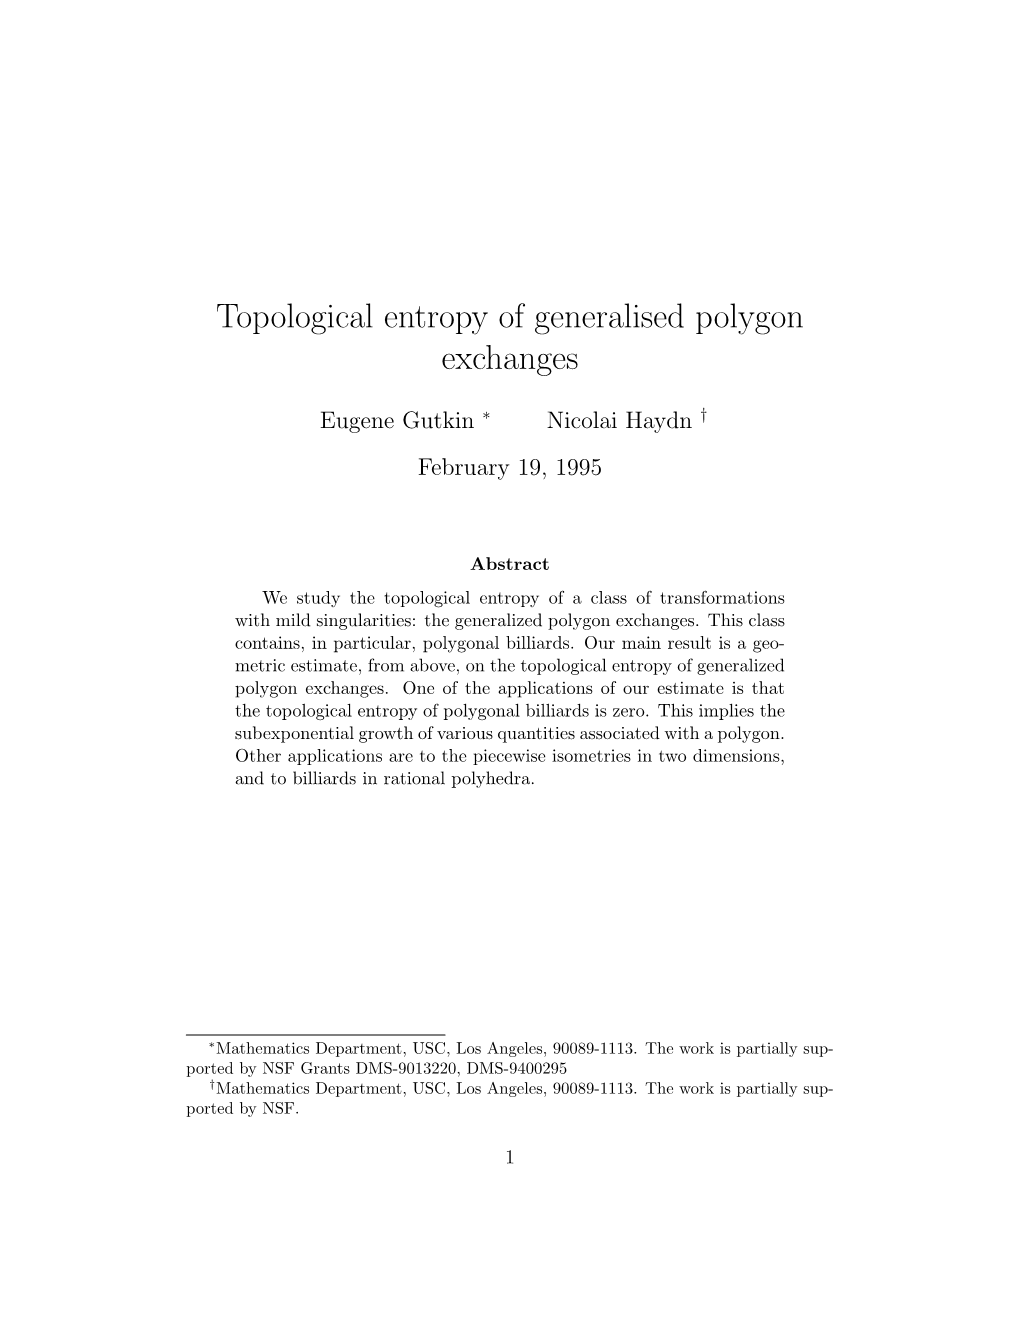 Topological Entropy of Generalised Polygon Exchanges